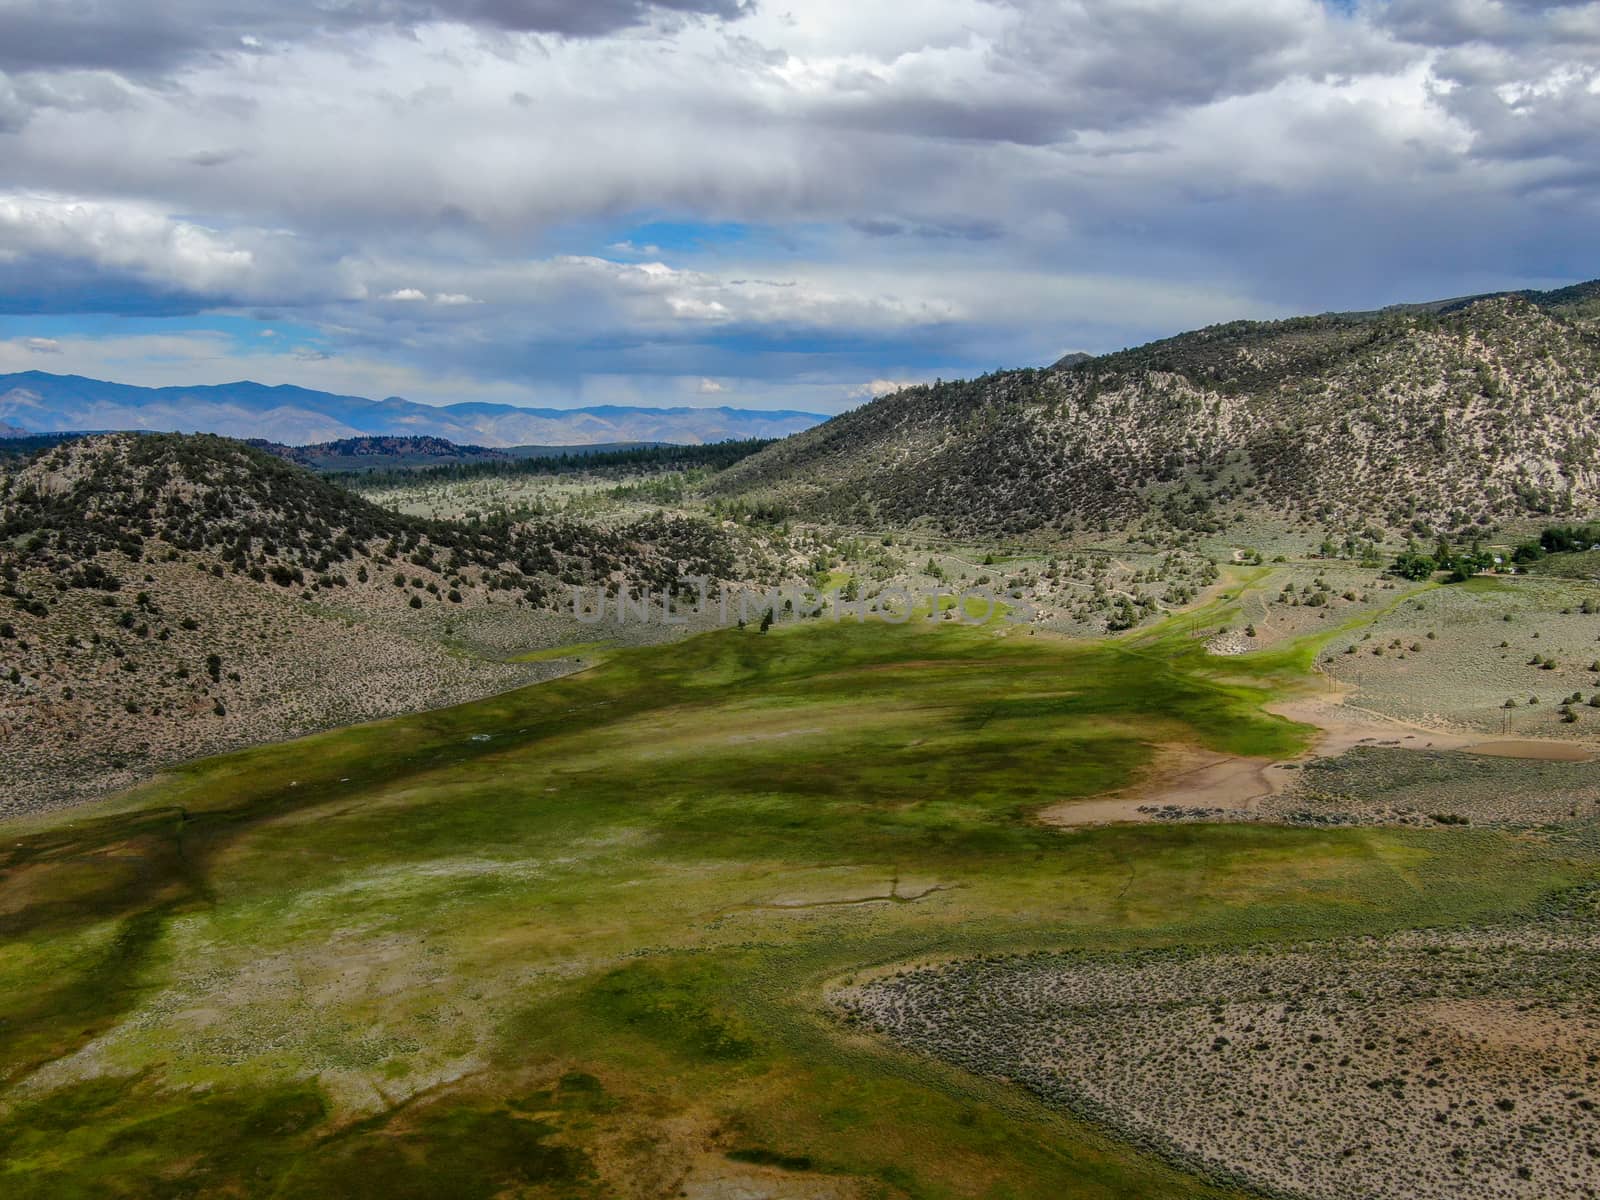 Aerial view of green land valley and mountain in Aspen Springs, Mono County California, USA